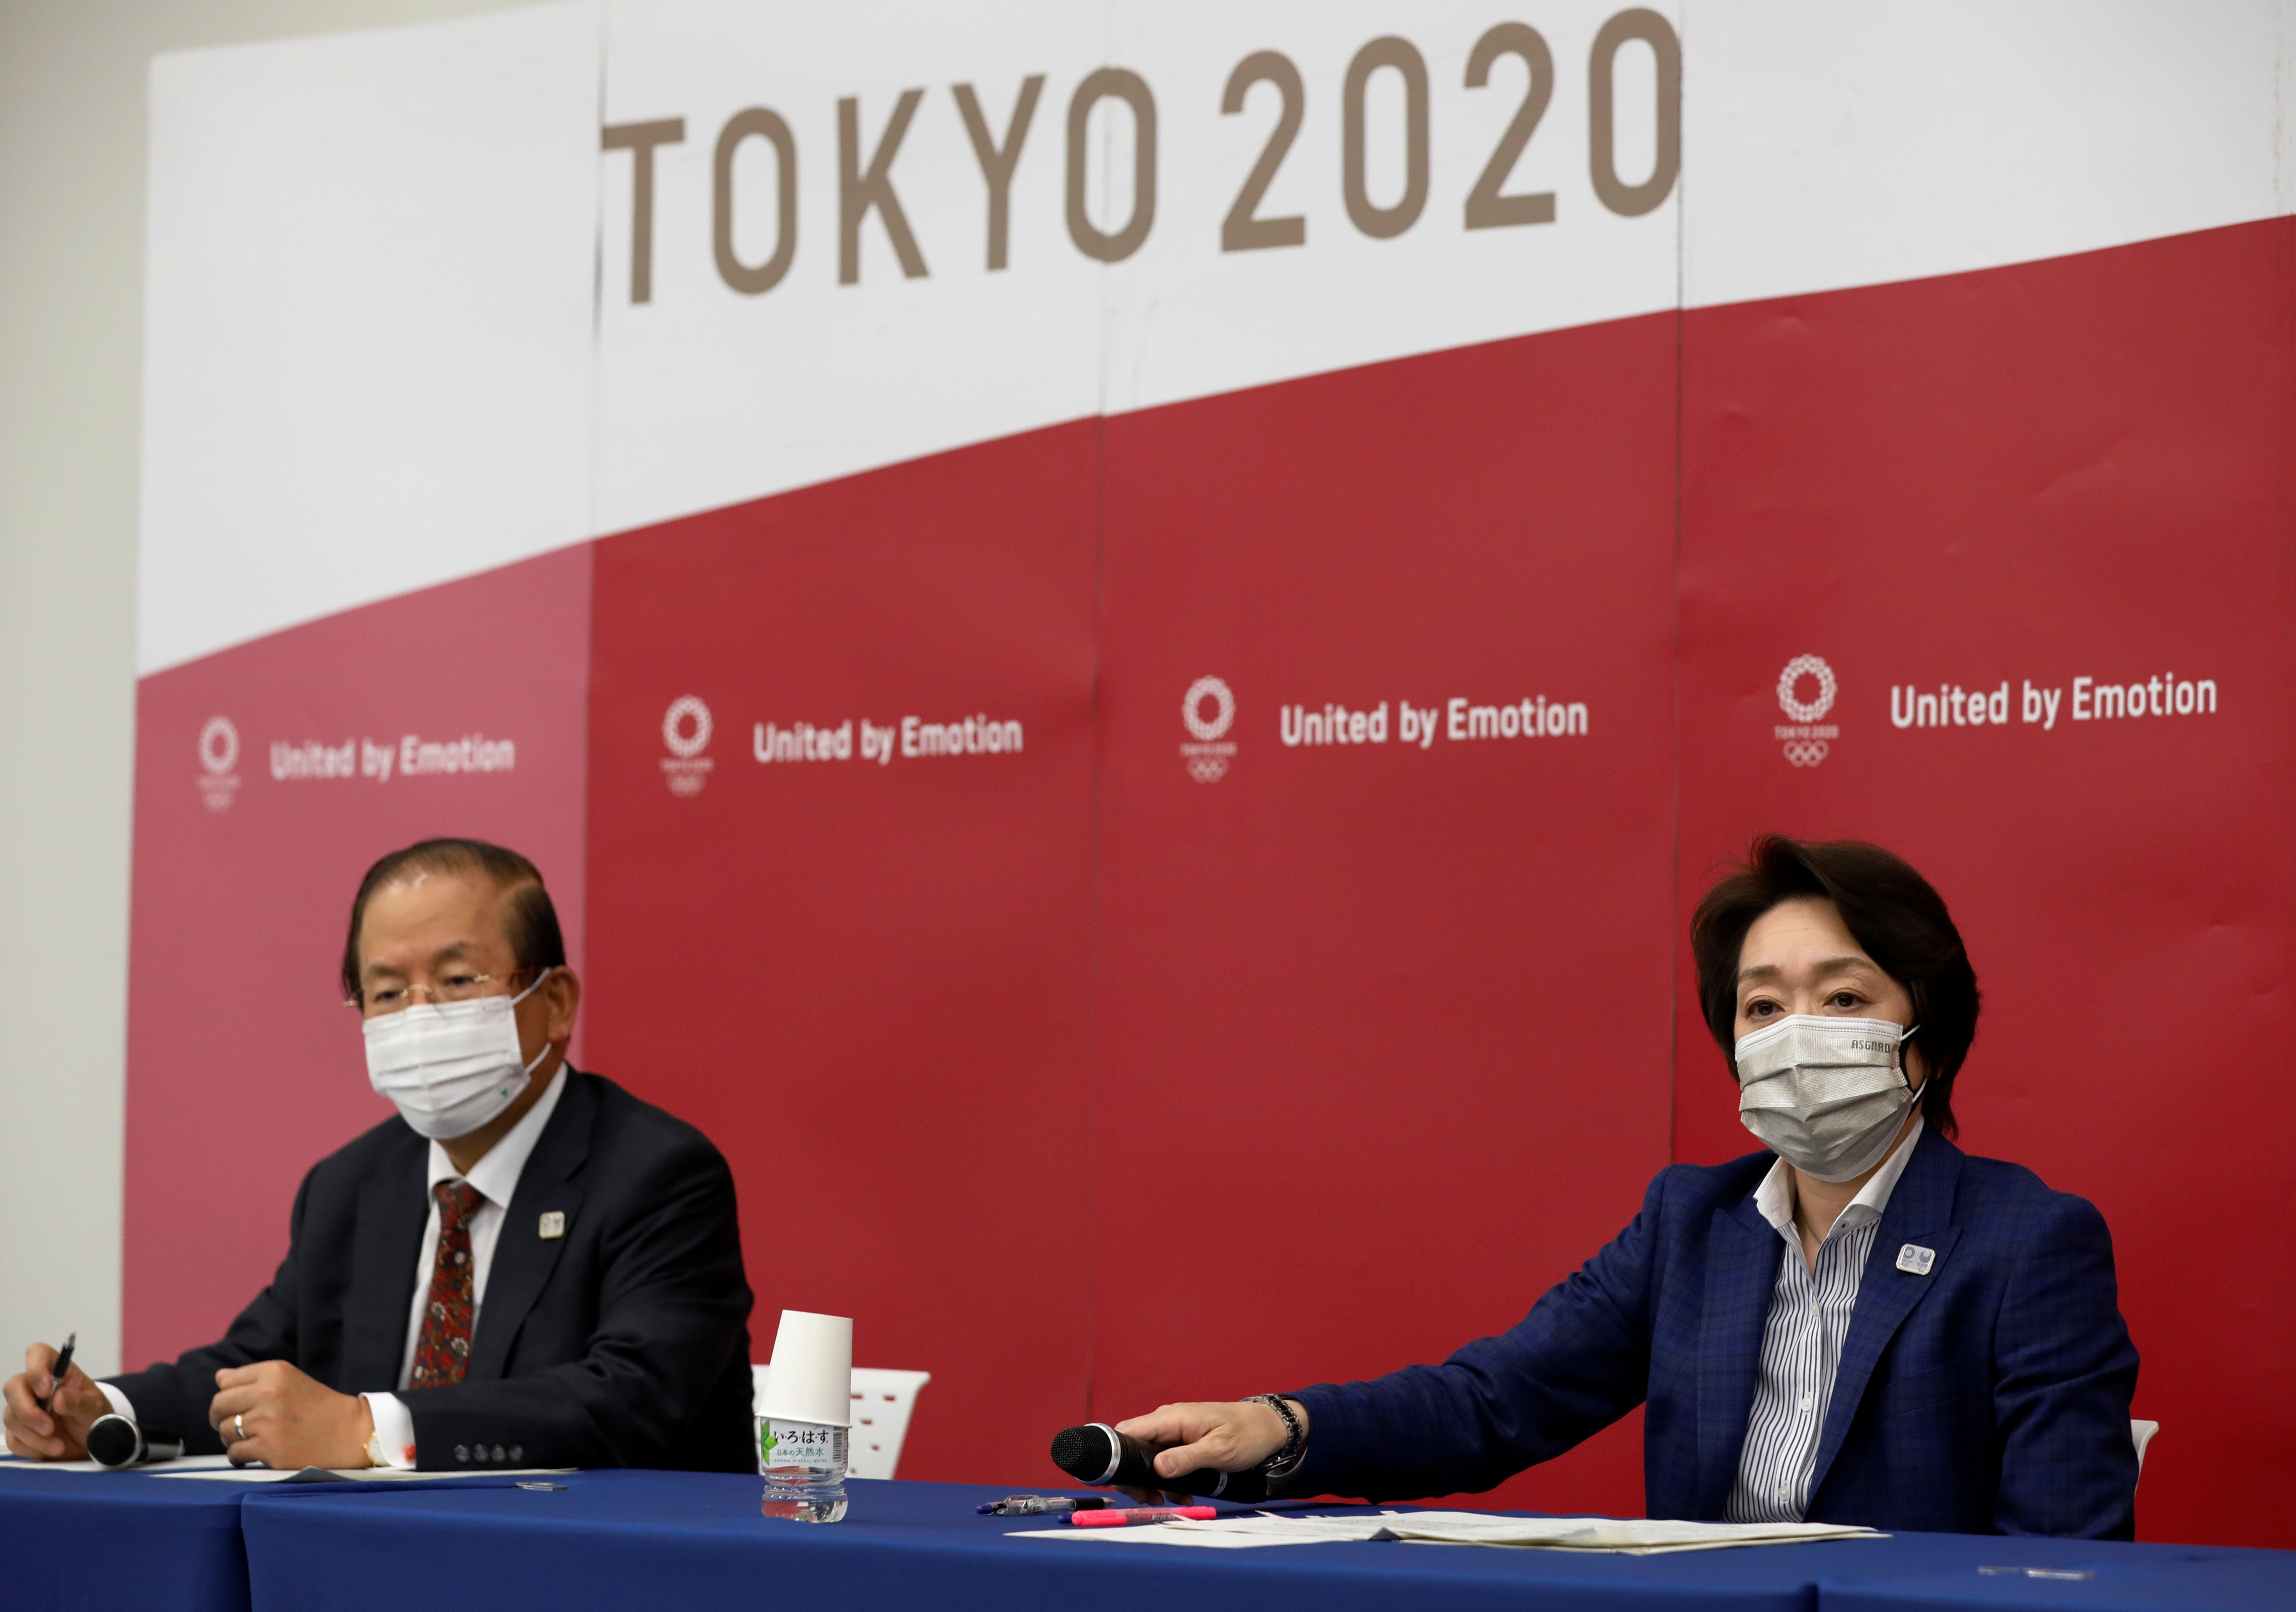 Tokyo 2020 news conference following the IOC Executive Board meeting in Tokyo